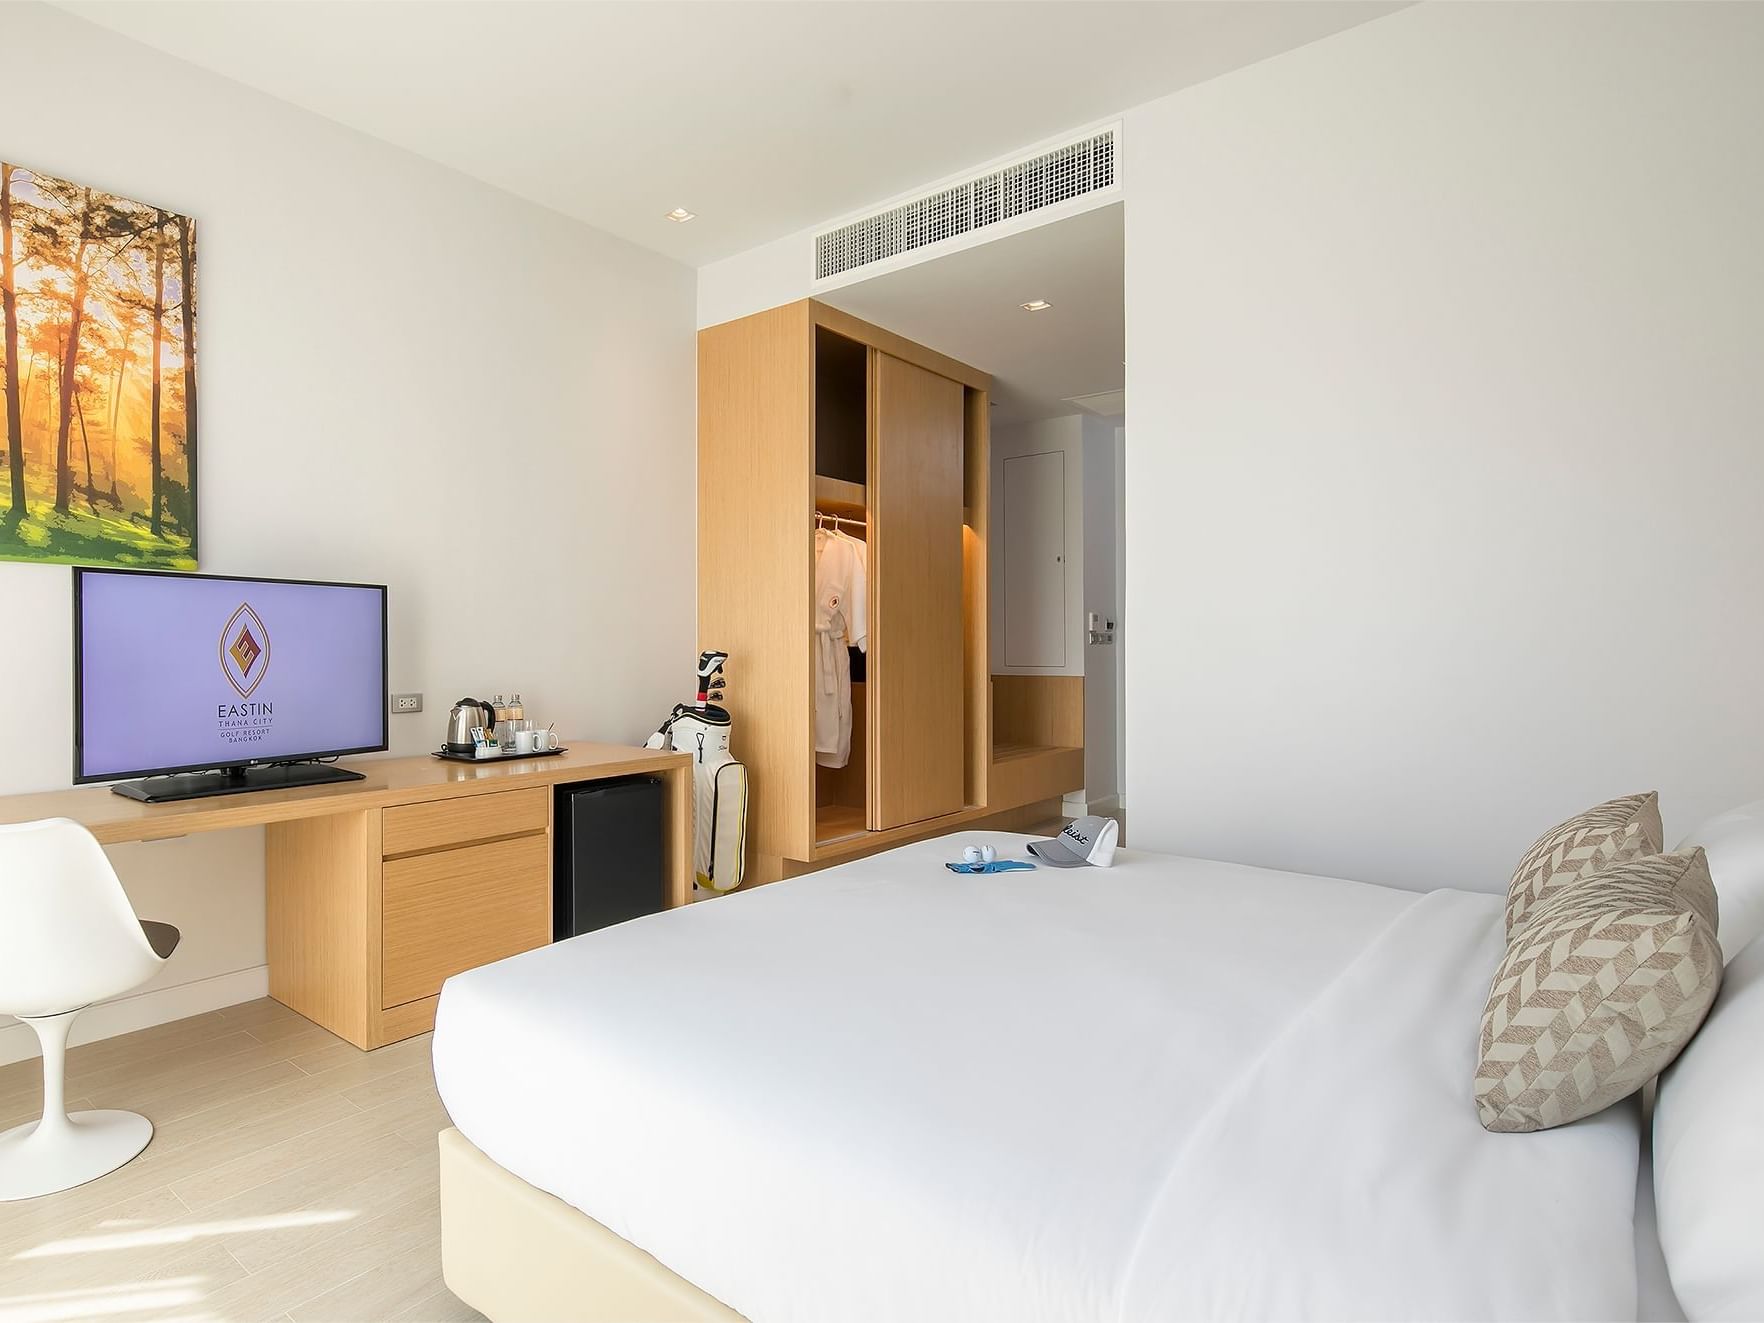 Bed & Tv stand in Superior Golf Course View at Eastin Hotels